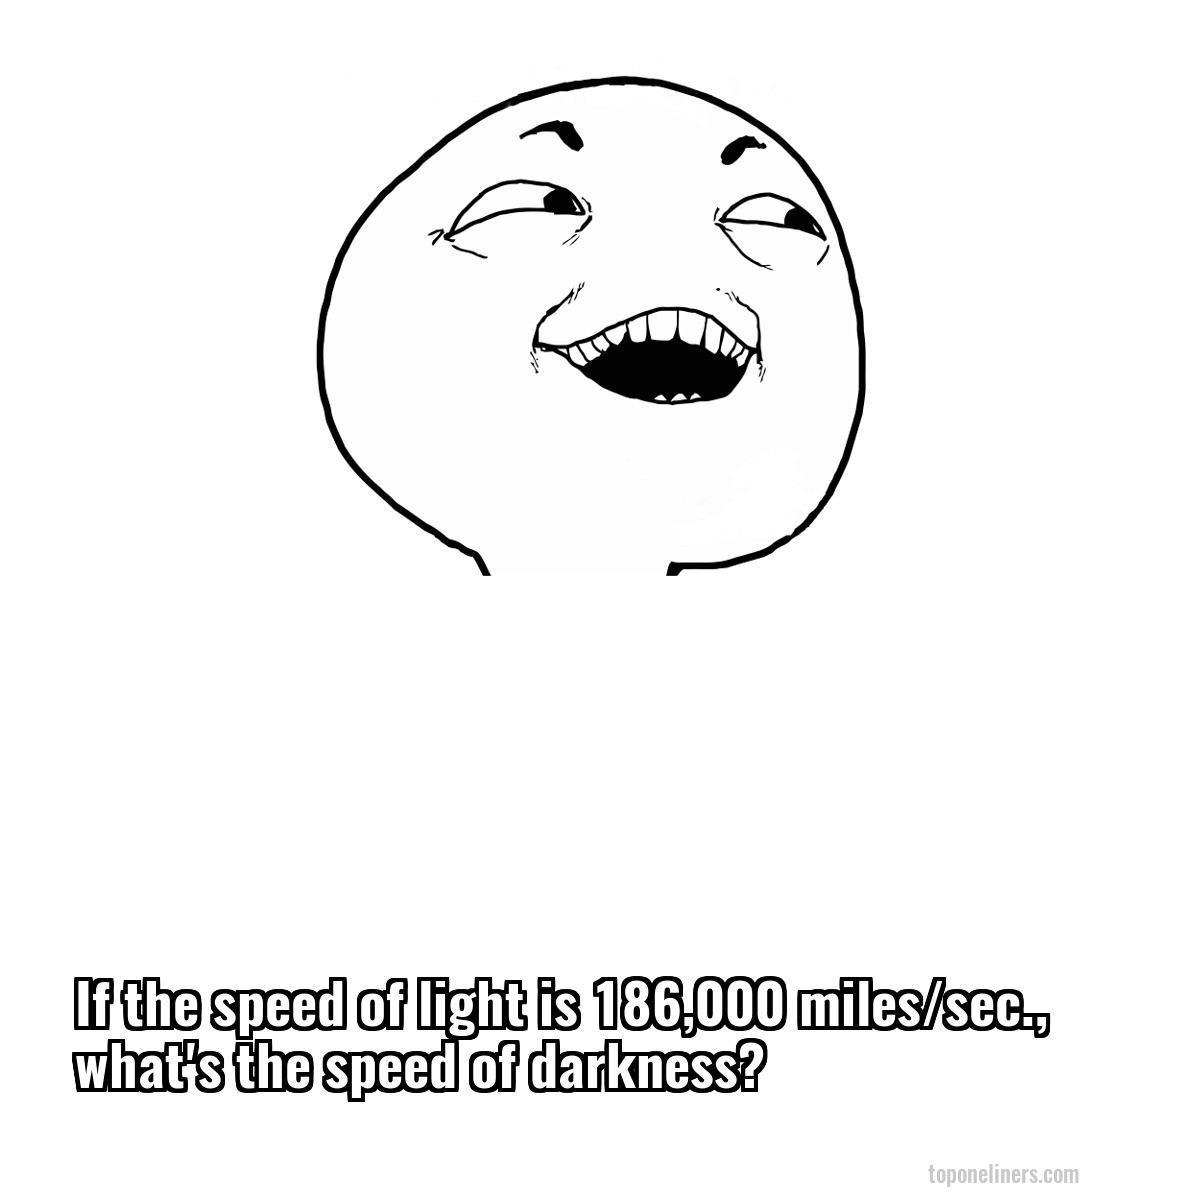 If the speed of light is 186,000 miles/sec., what's the speed of darkness?
